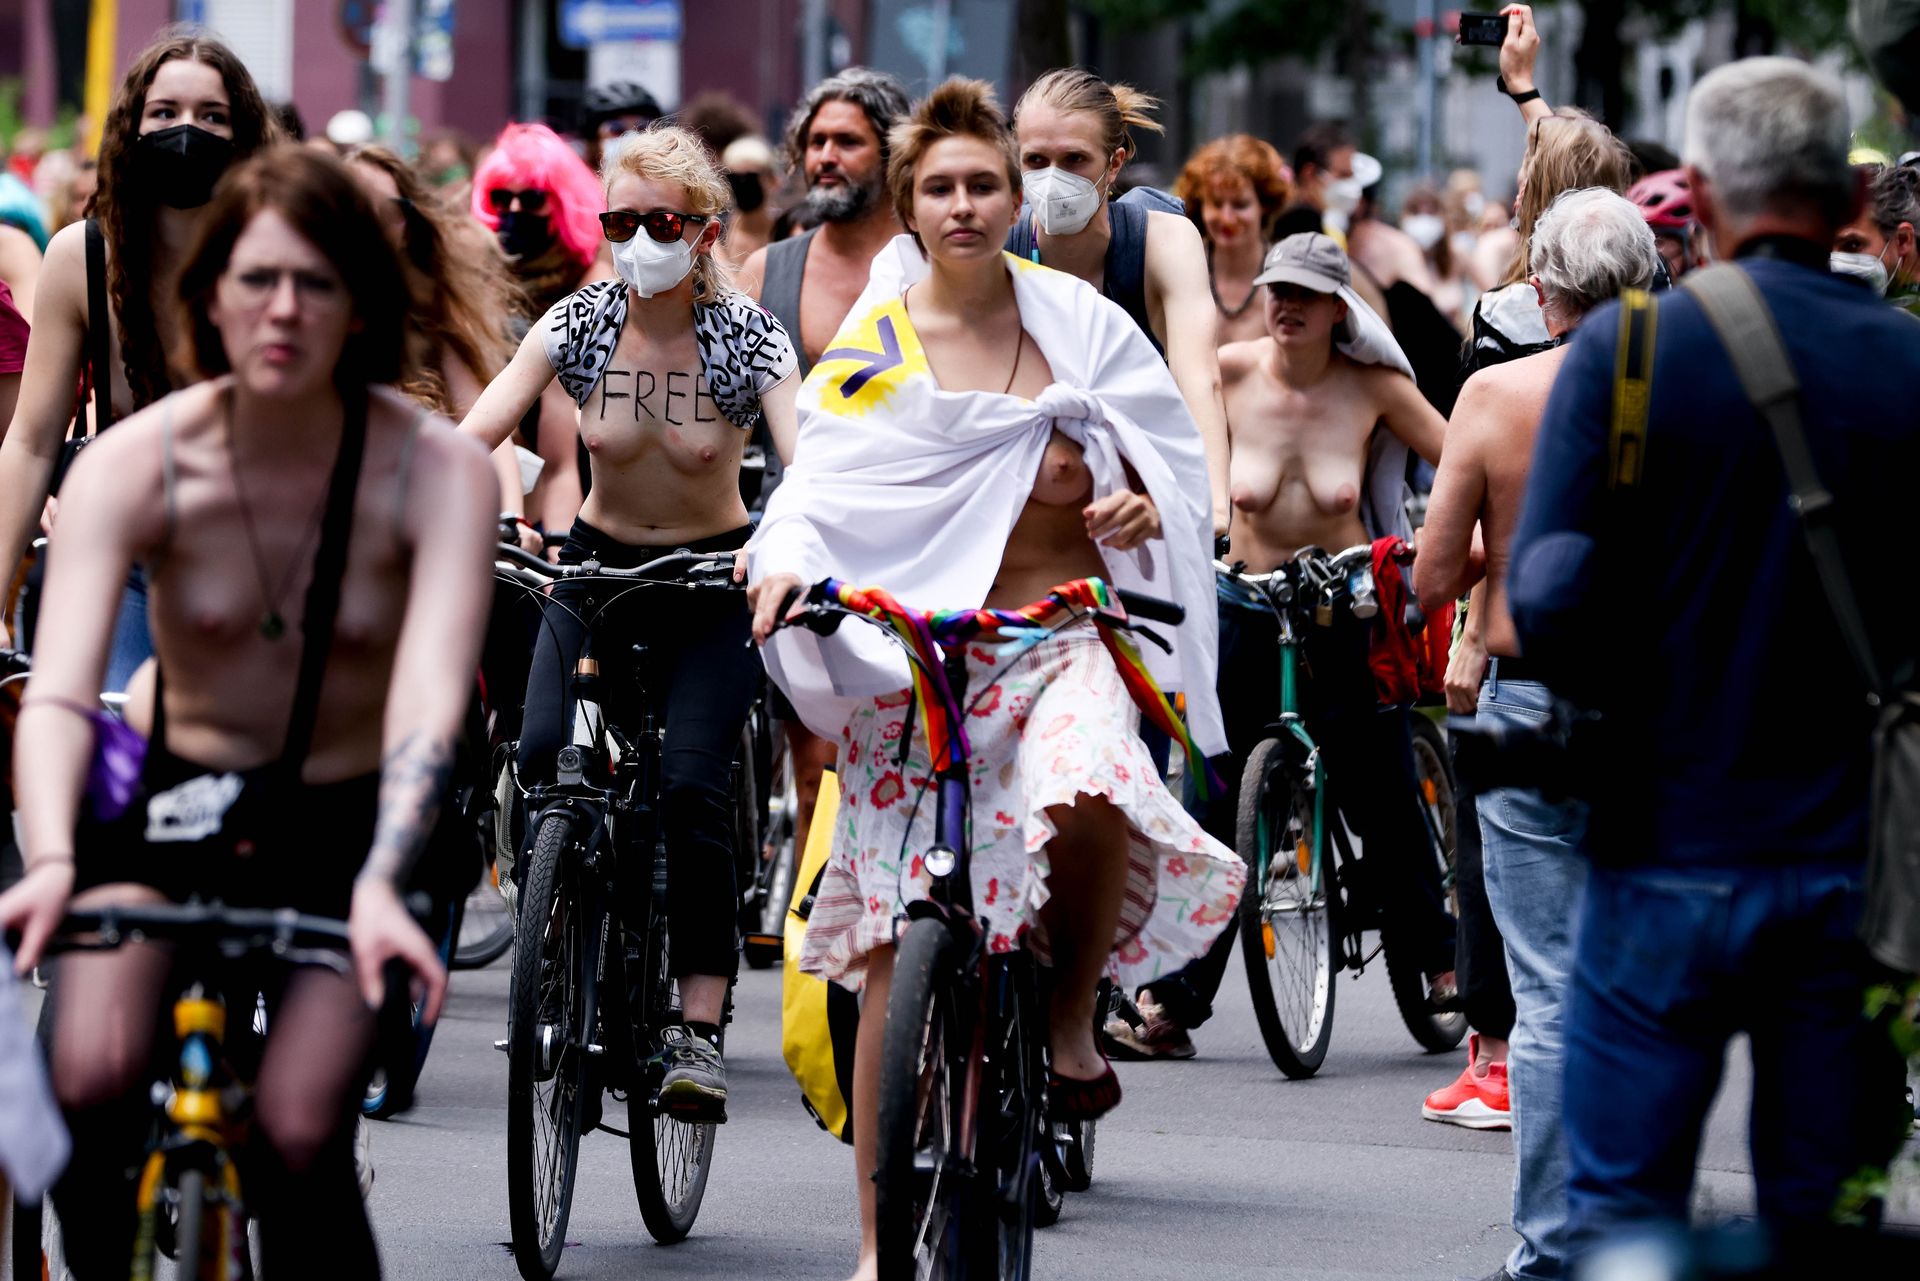 Topless-Protest-The-Fappening-Blog-39.jpg